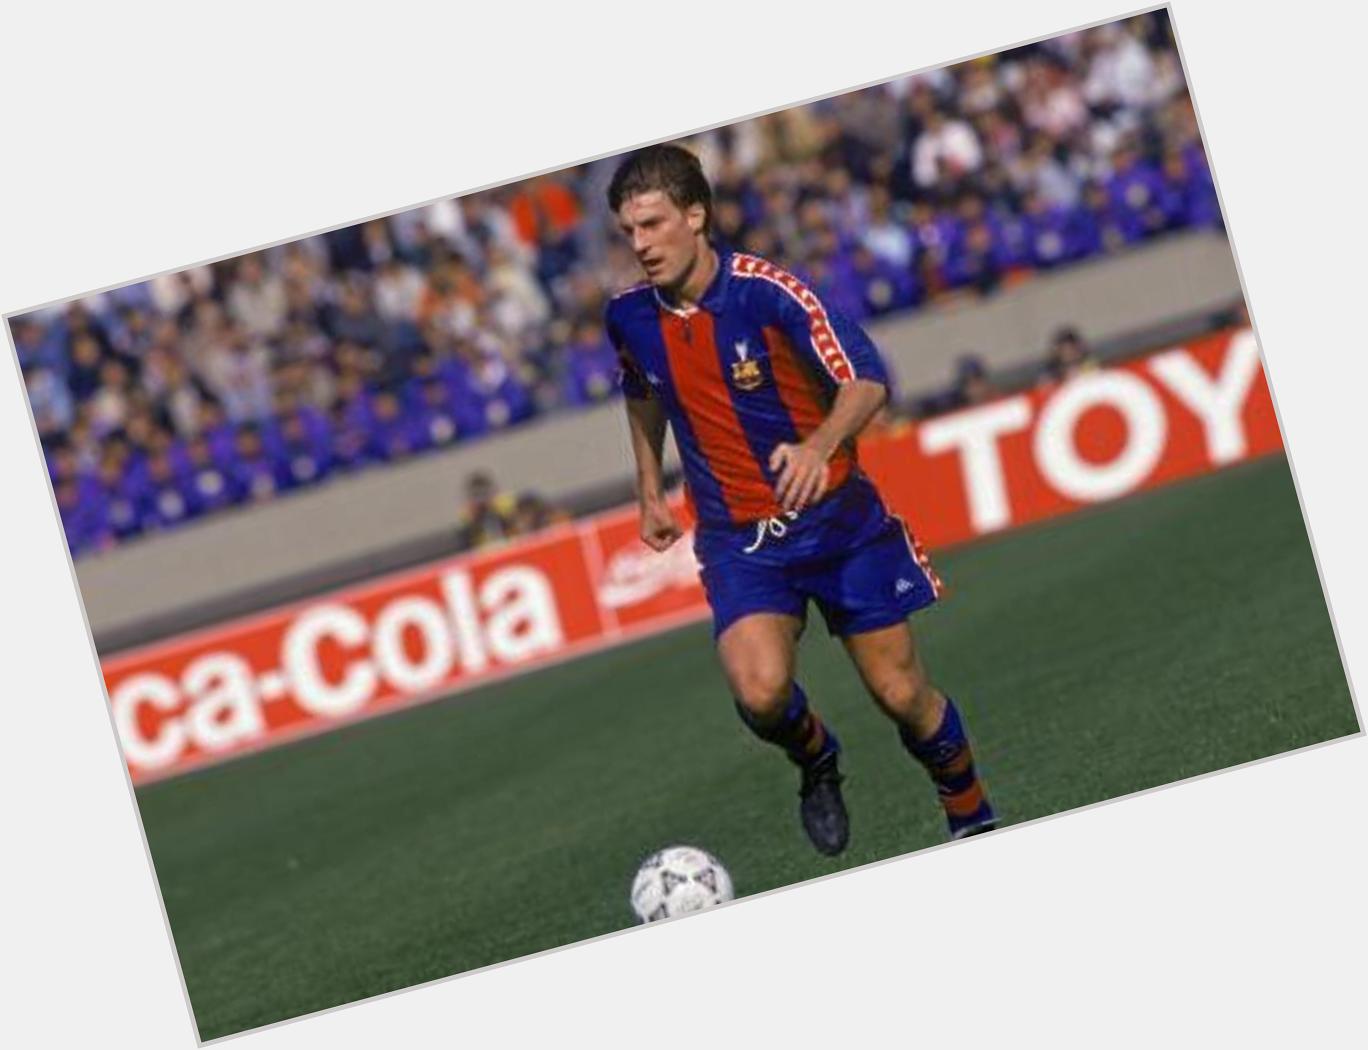 We wish Michael Laudrup a very happy 58th birthday. One of the greatest playmakers ever.  